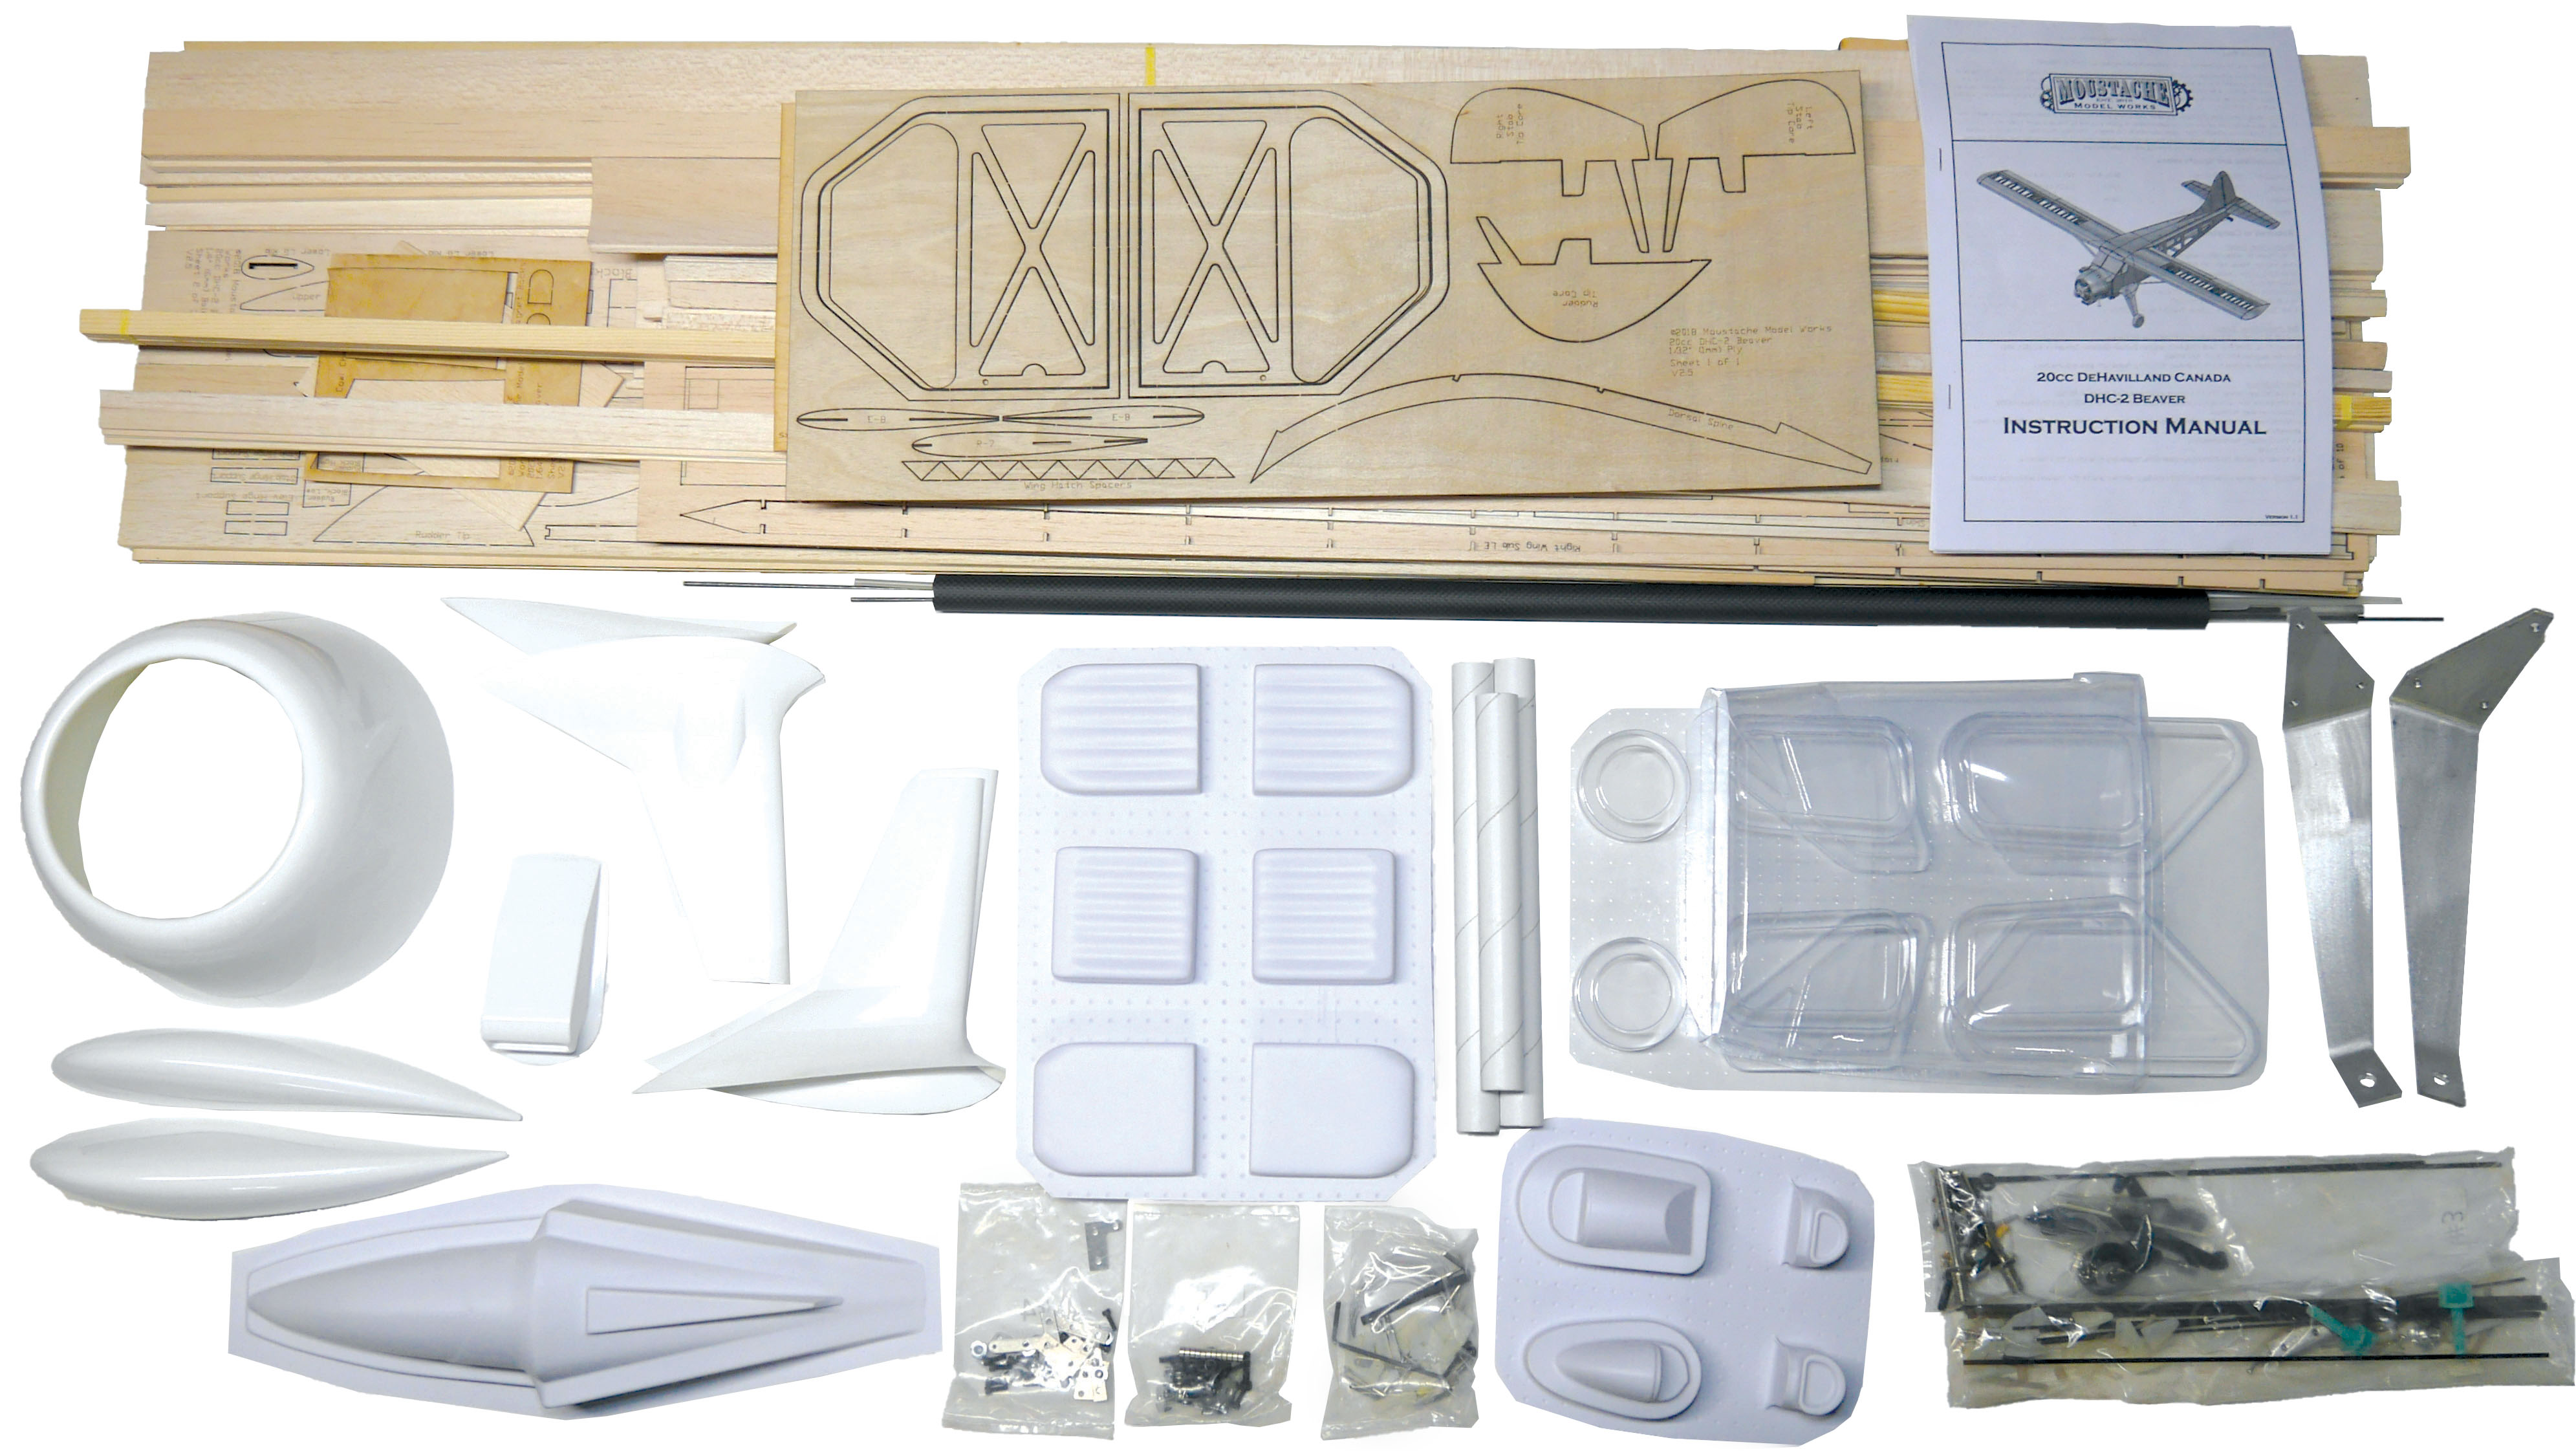 the kit includes hardware many prefabricated parts and excellent-quality laser cut wood